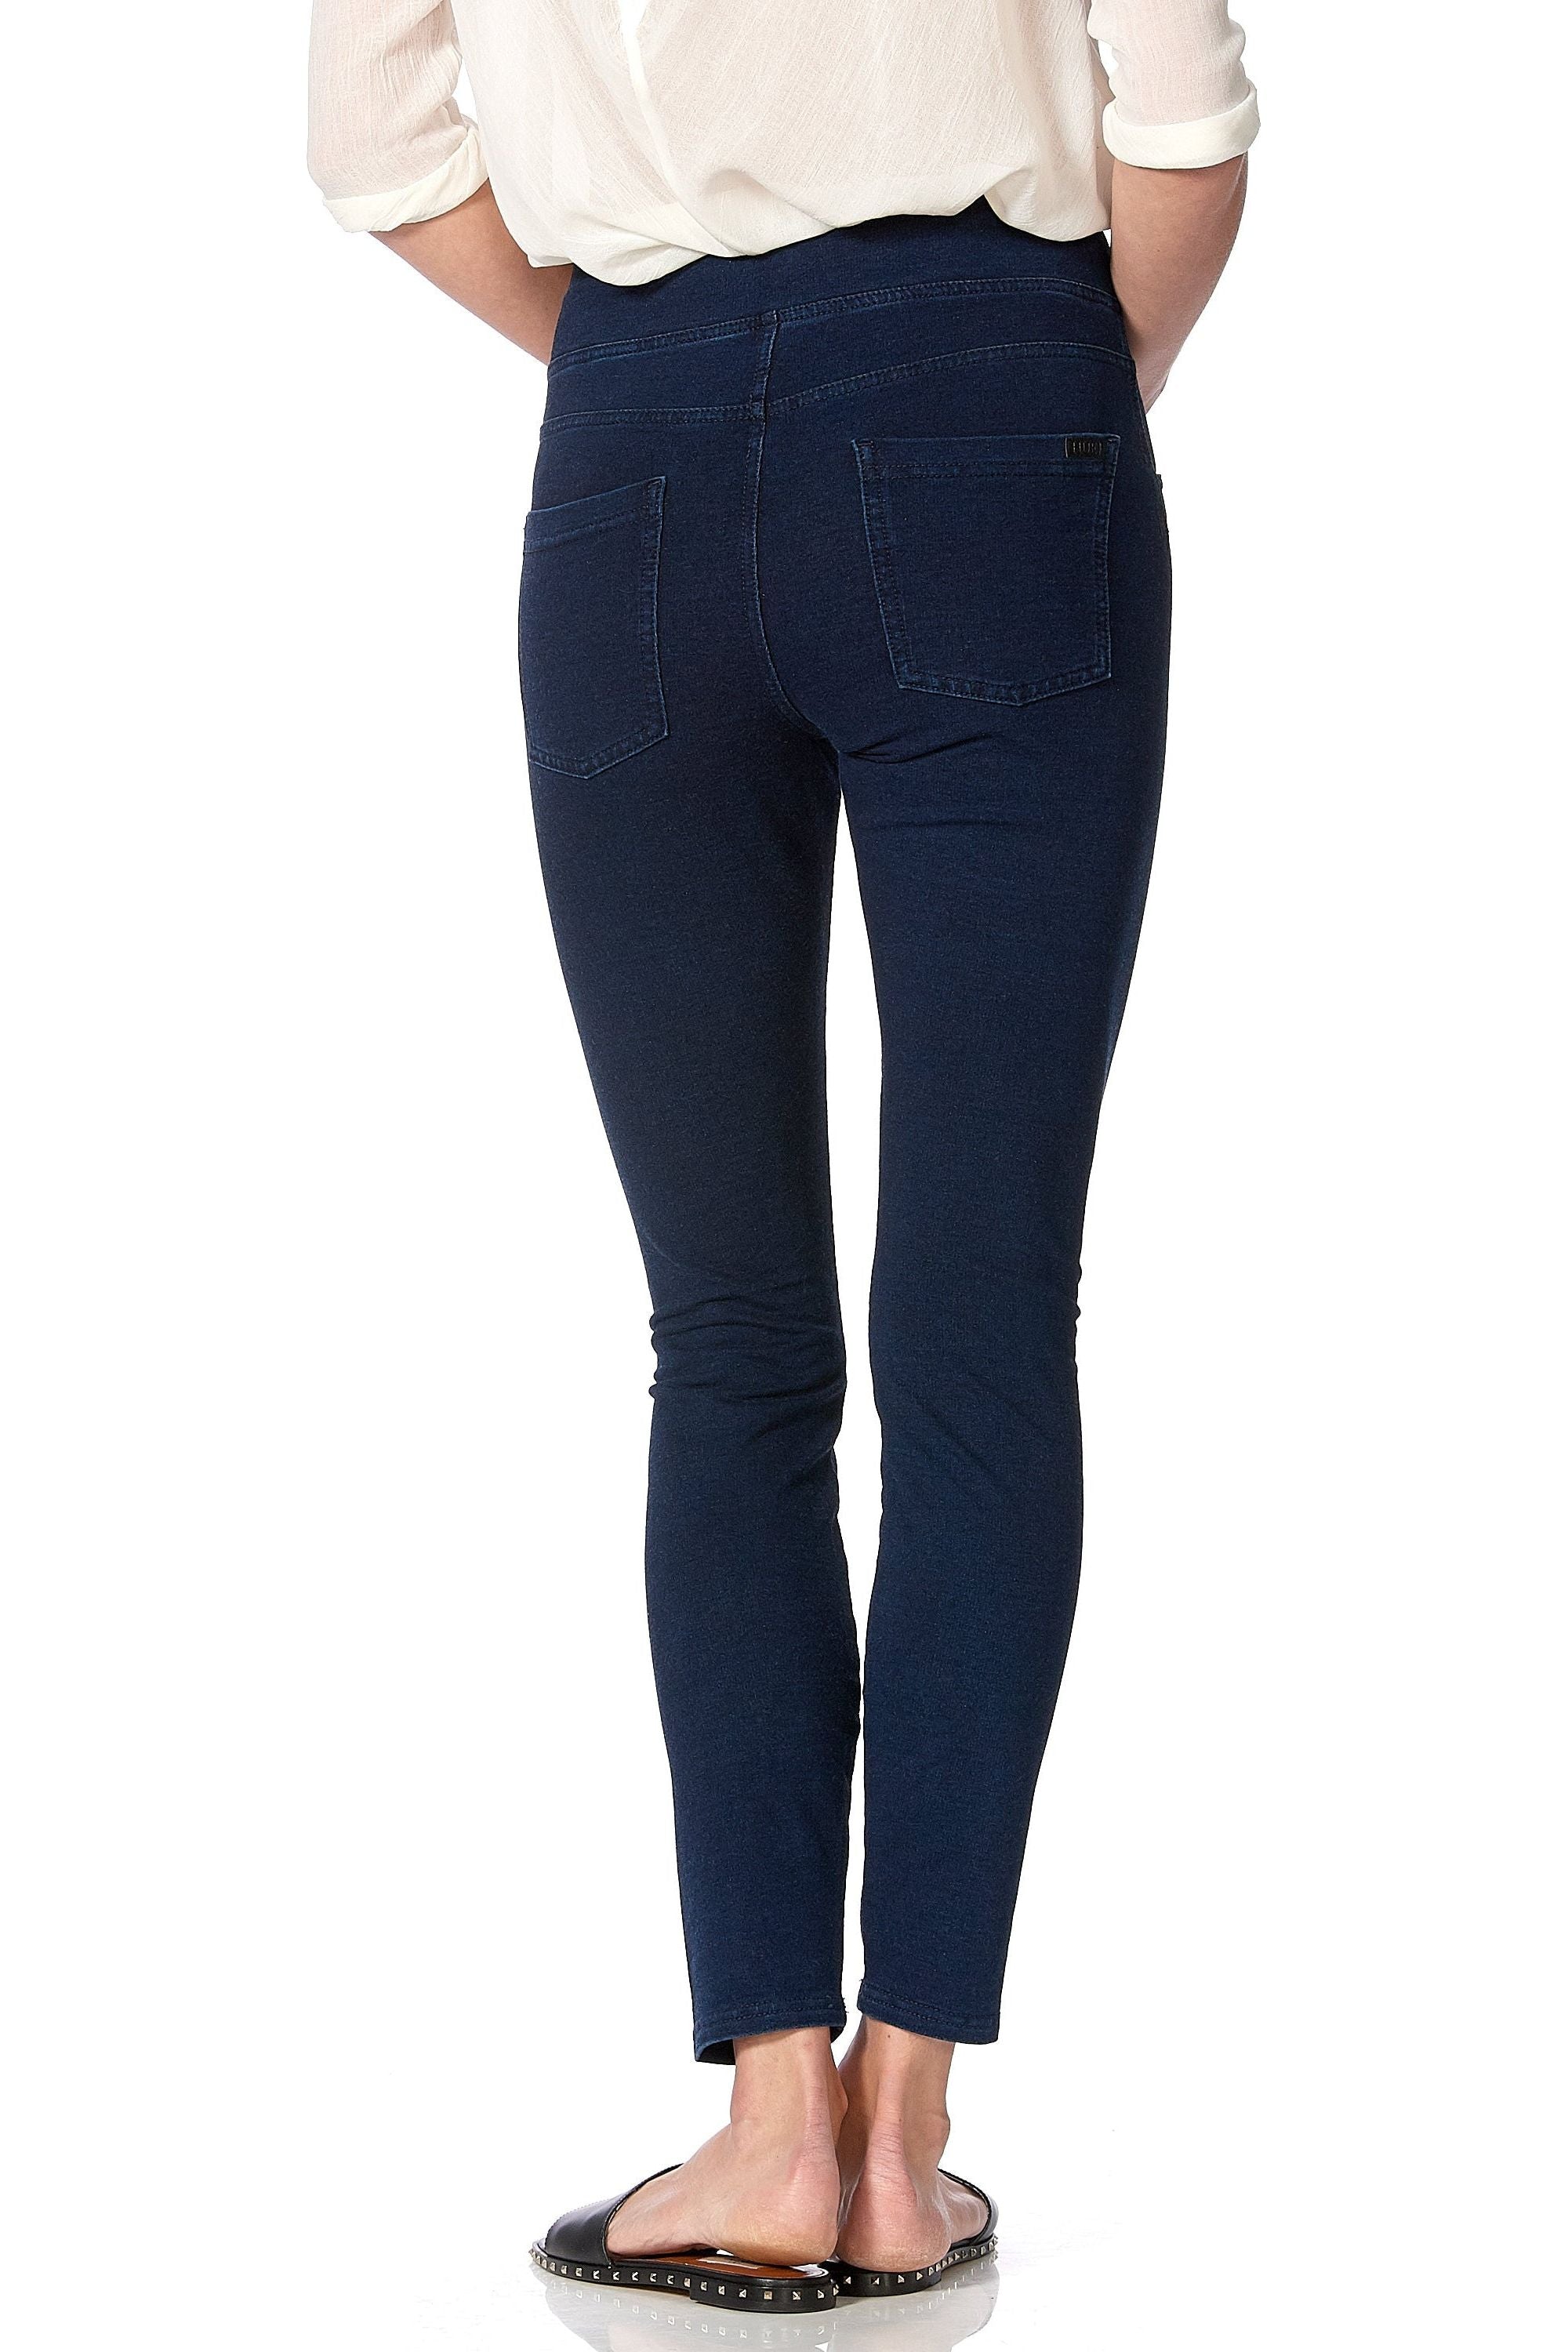 HUE Ultra Soft Denim Leggings - Style 20652Y – Close To You Boutique